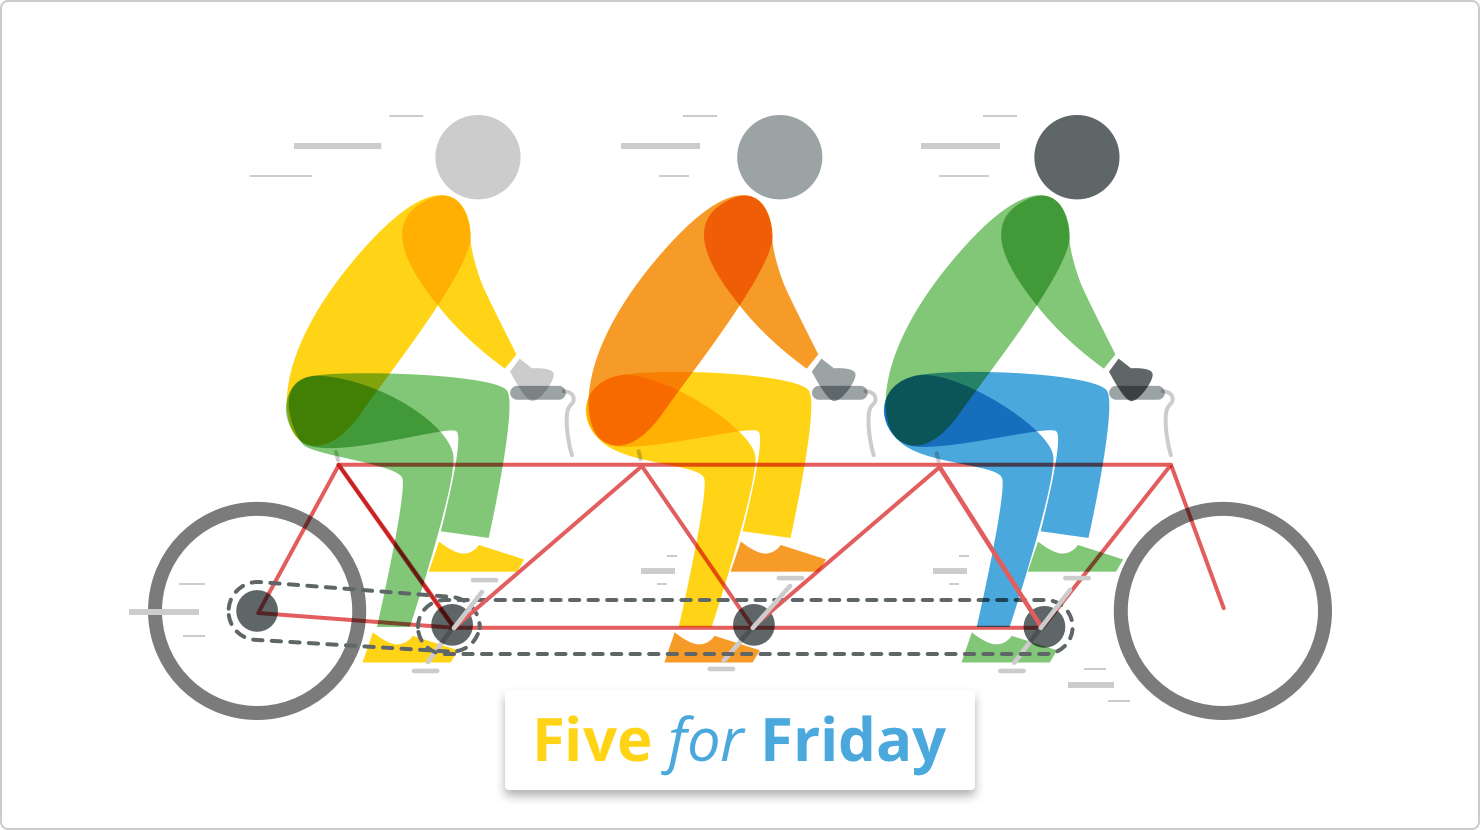 Five for Friday: Trust in the workplace